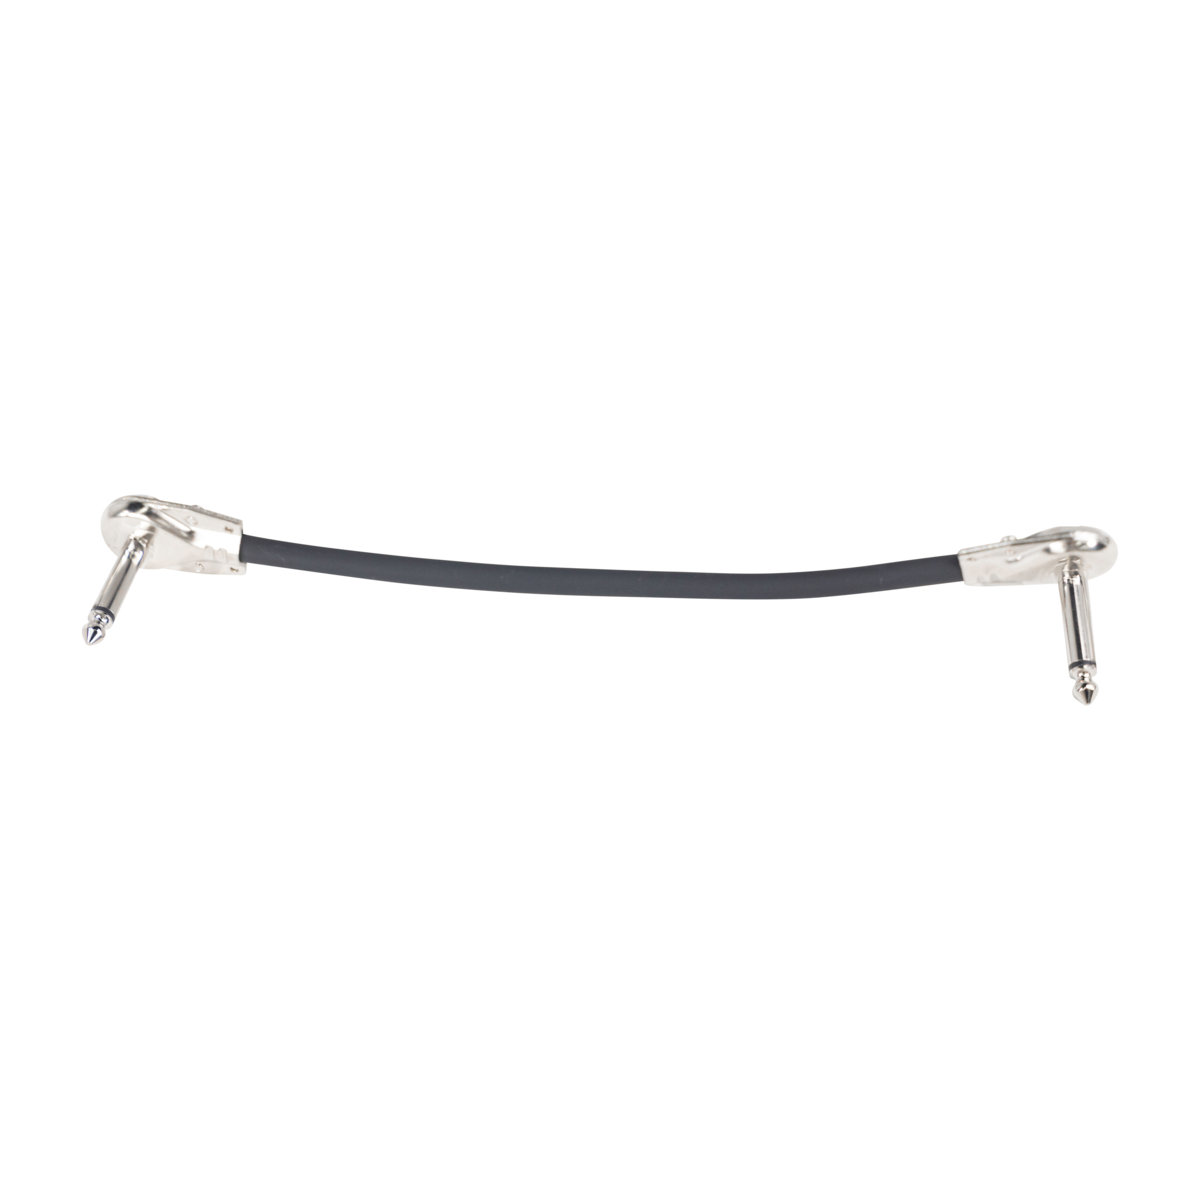 GCWB-INS-6INRA 6-Inch Instrument/Patch Cable